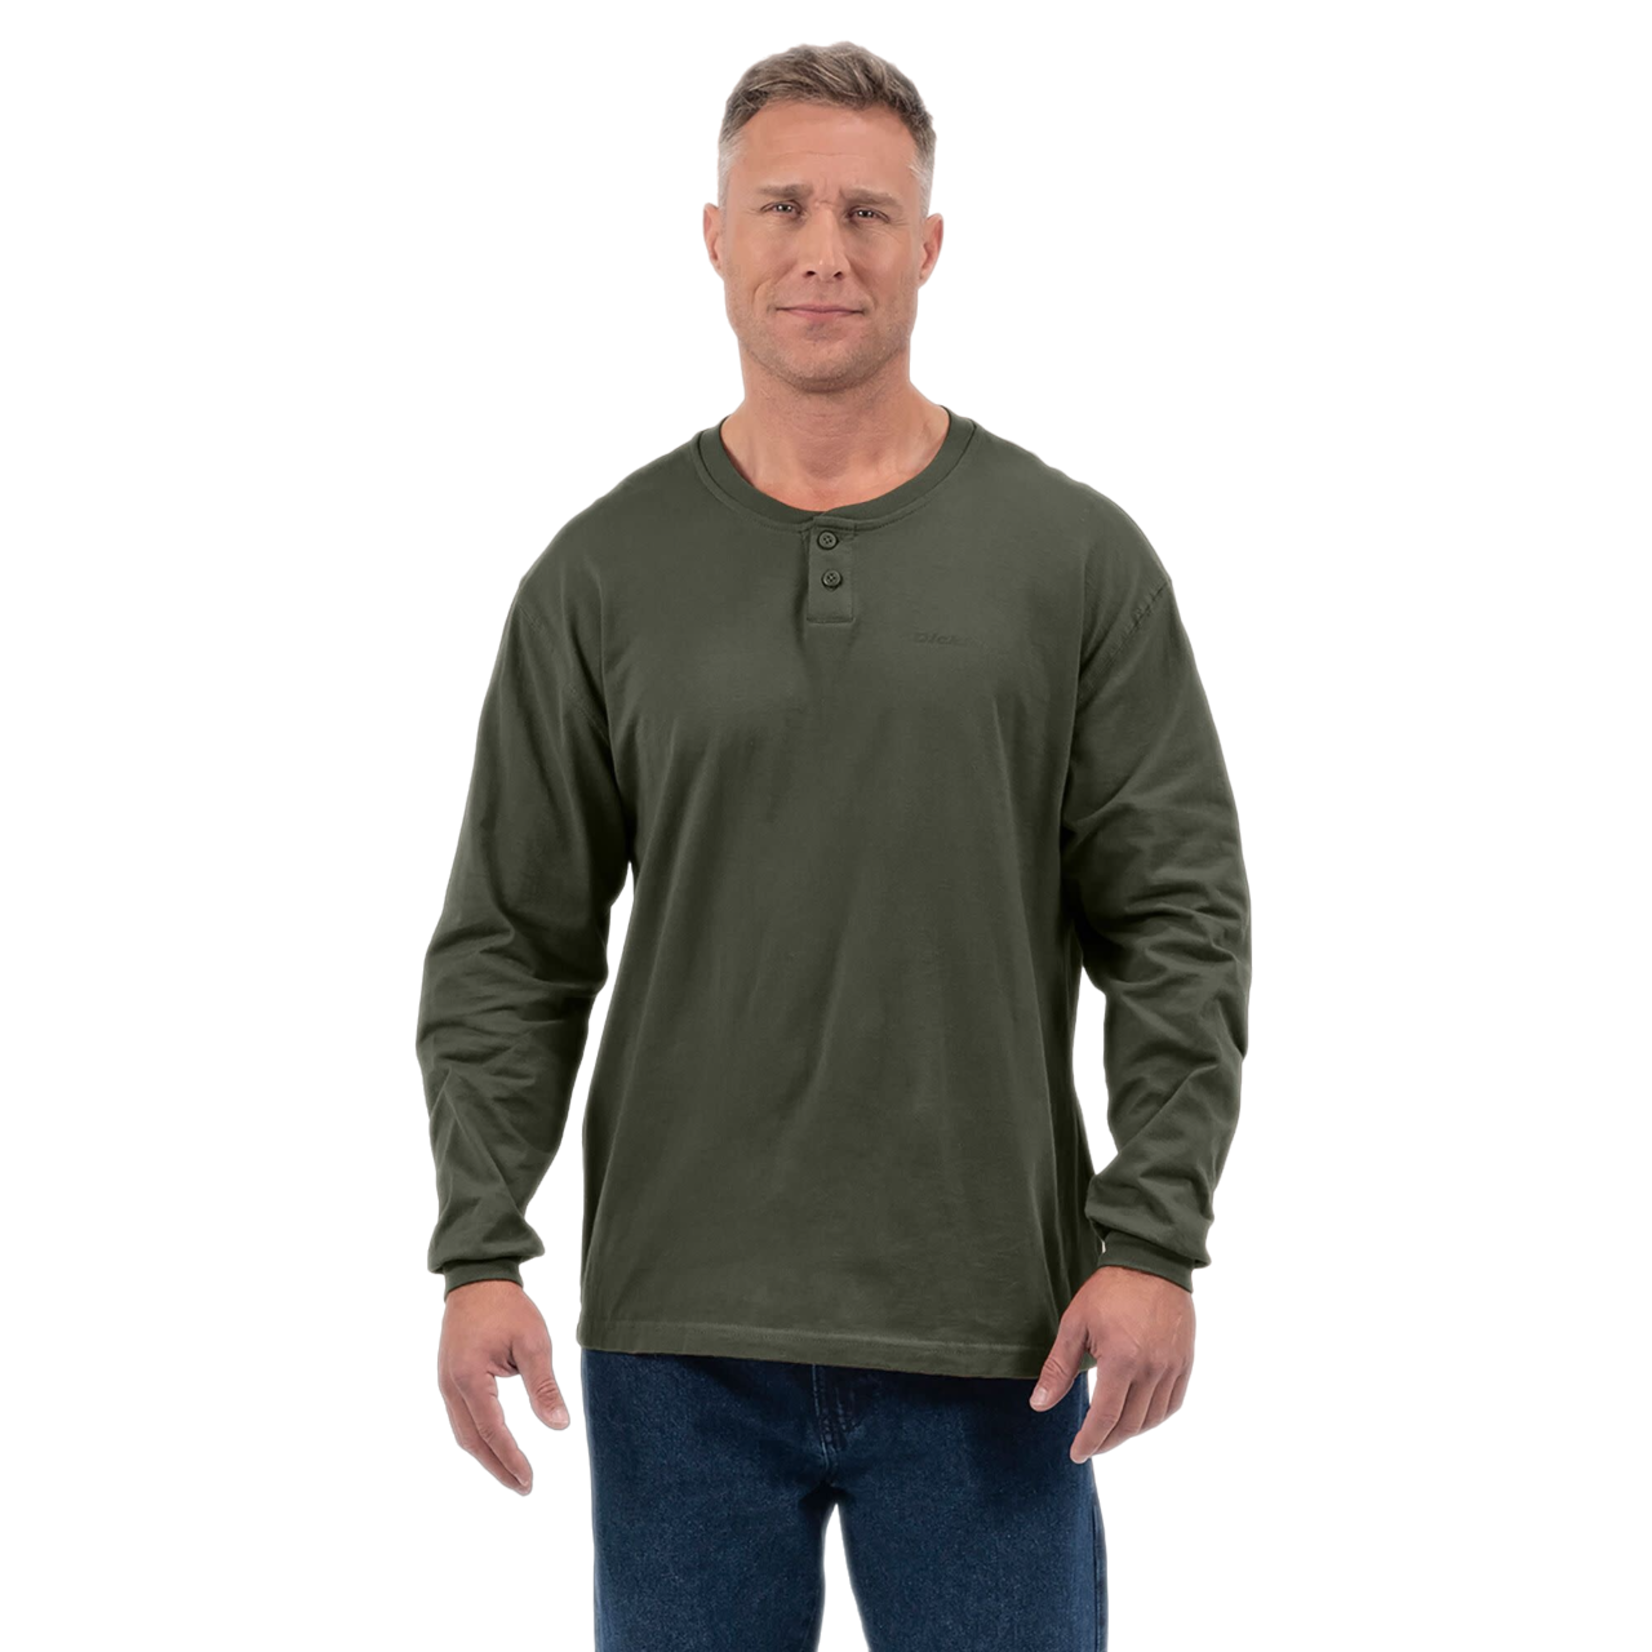 Dickies L/S Henley T-Shirt - Olive Green - Attic Skate & Snow Shop